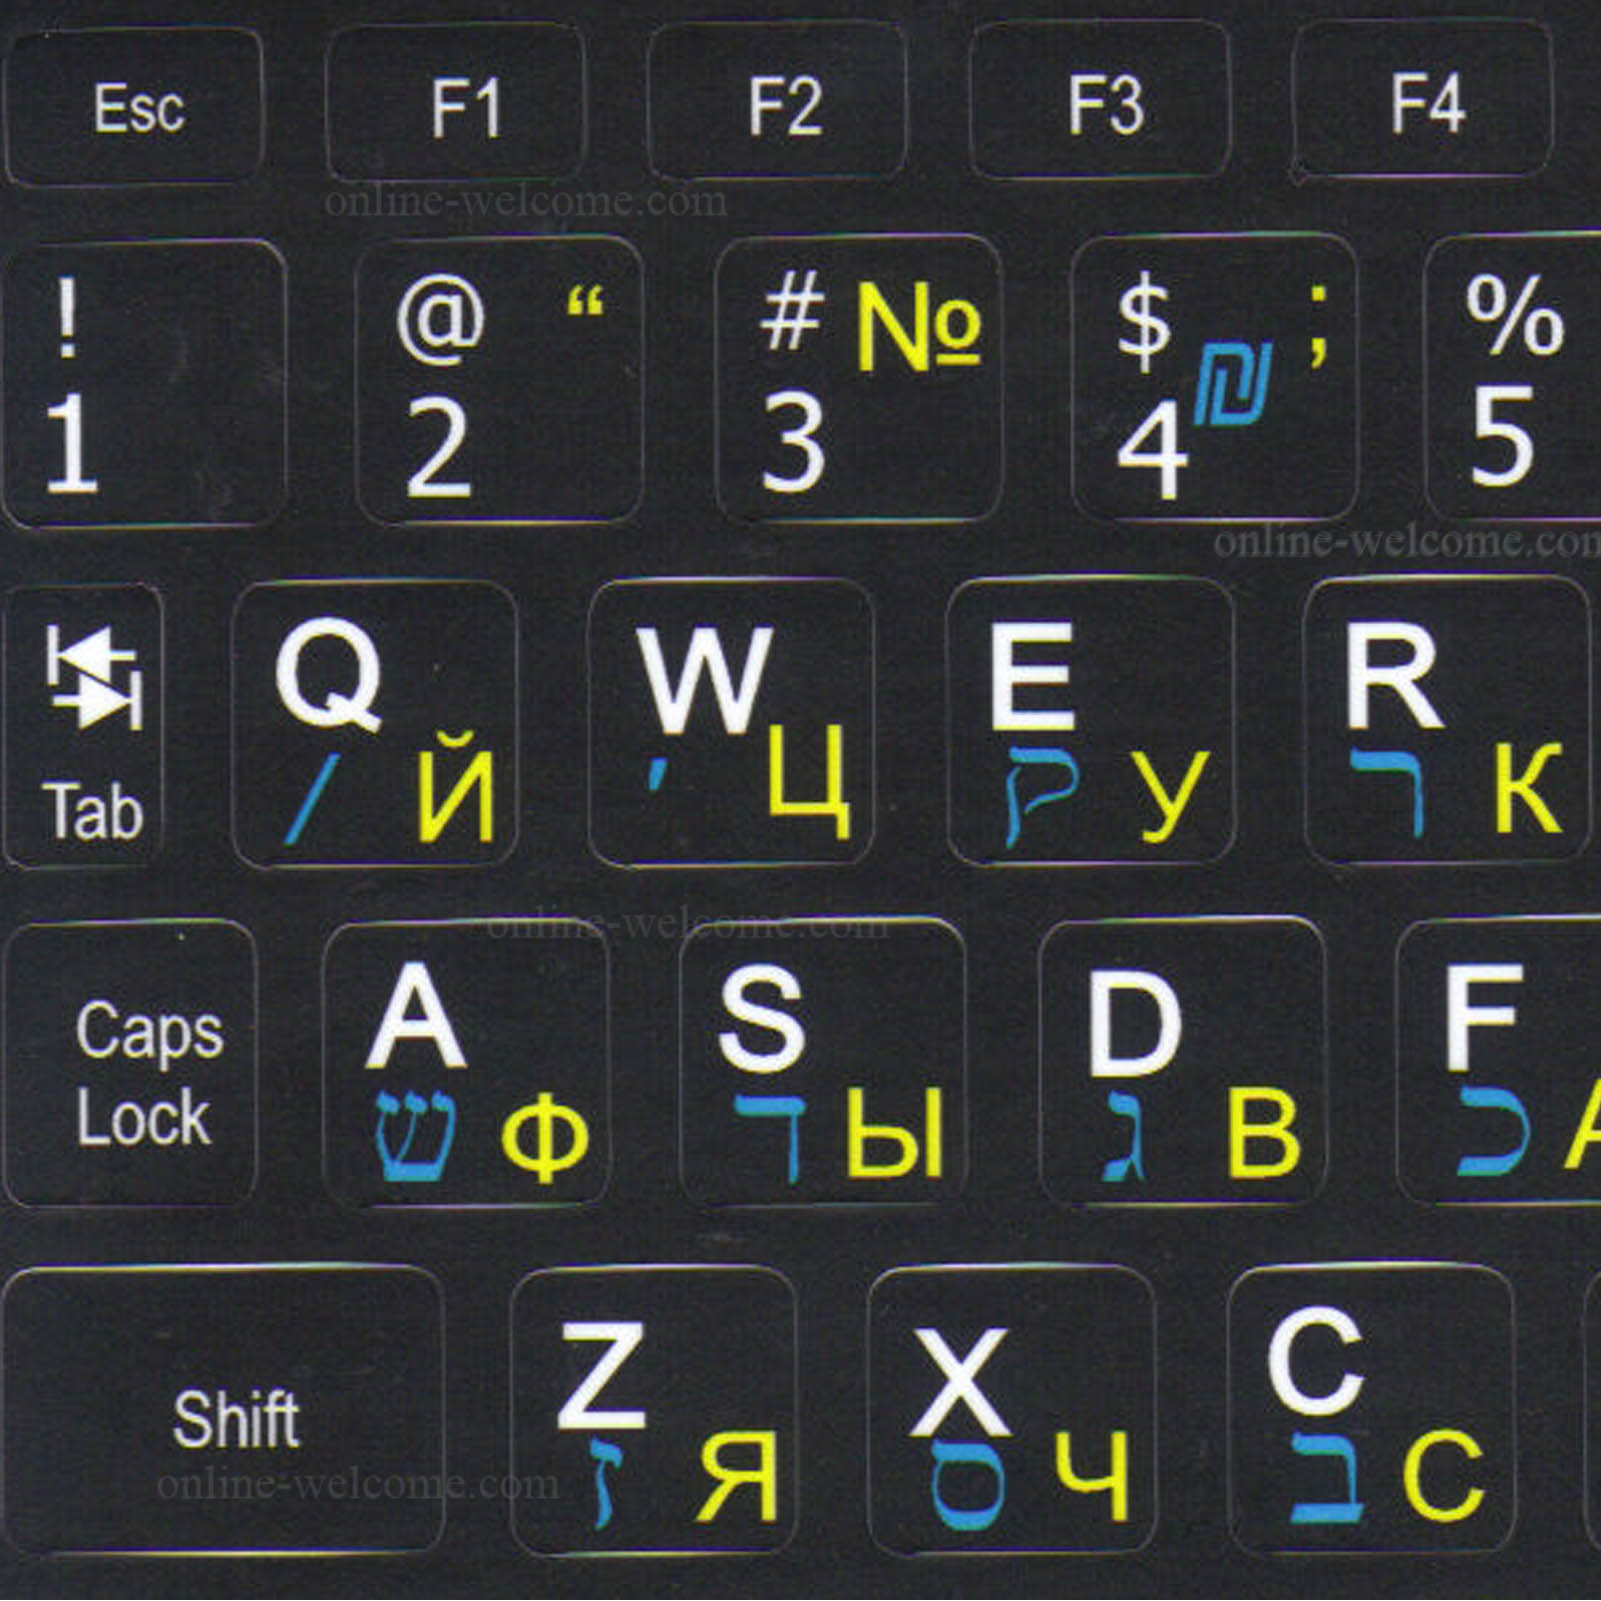 Hebrew-Russian-English keyboard sticker for mini keyboard small label letters for computer black